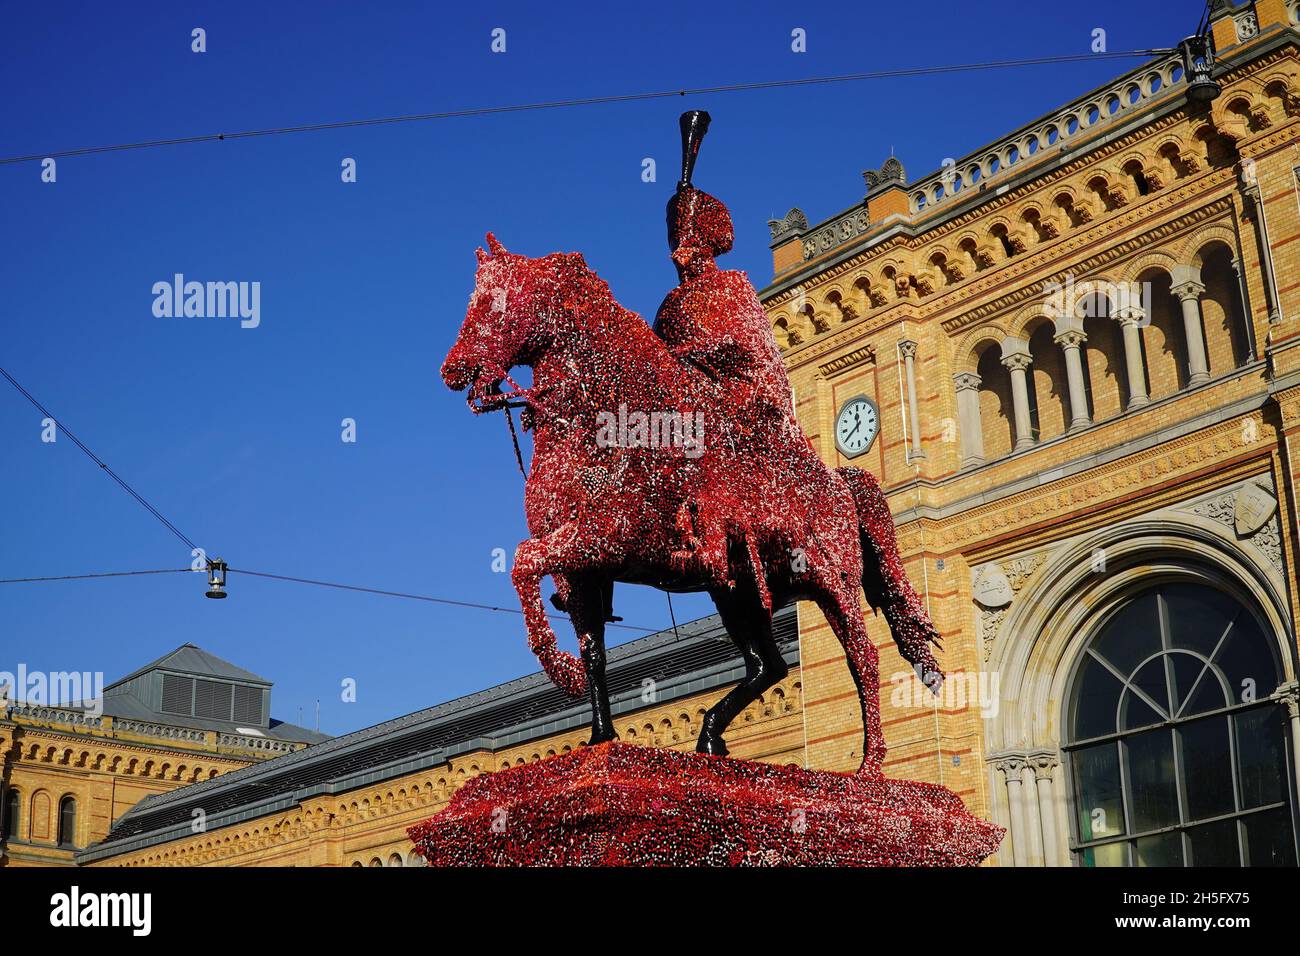 Equestrian statue of Ernest Augustus, King of Hanover. The monument was now wrapped in black foil and all citizens may decorate it with colorful dots. Stock Photo